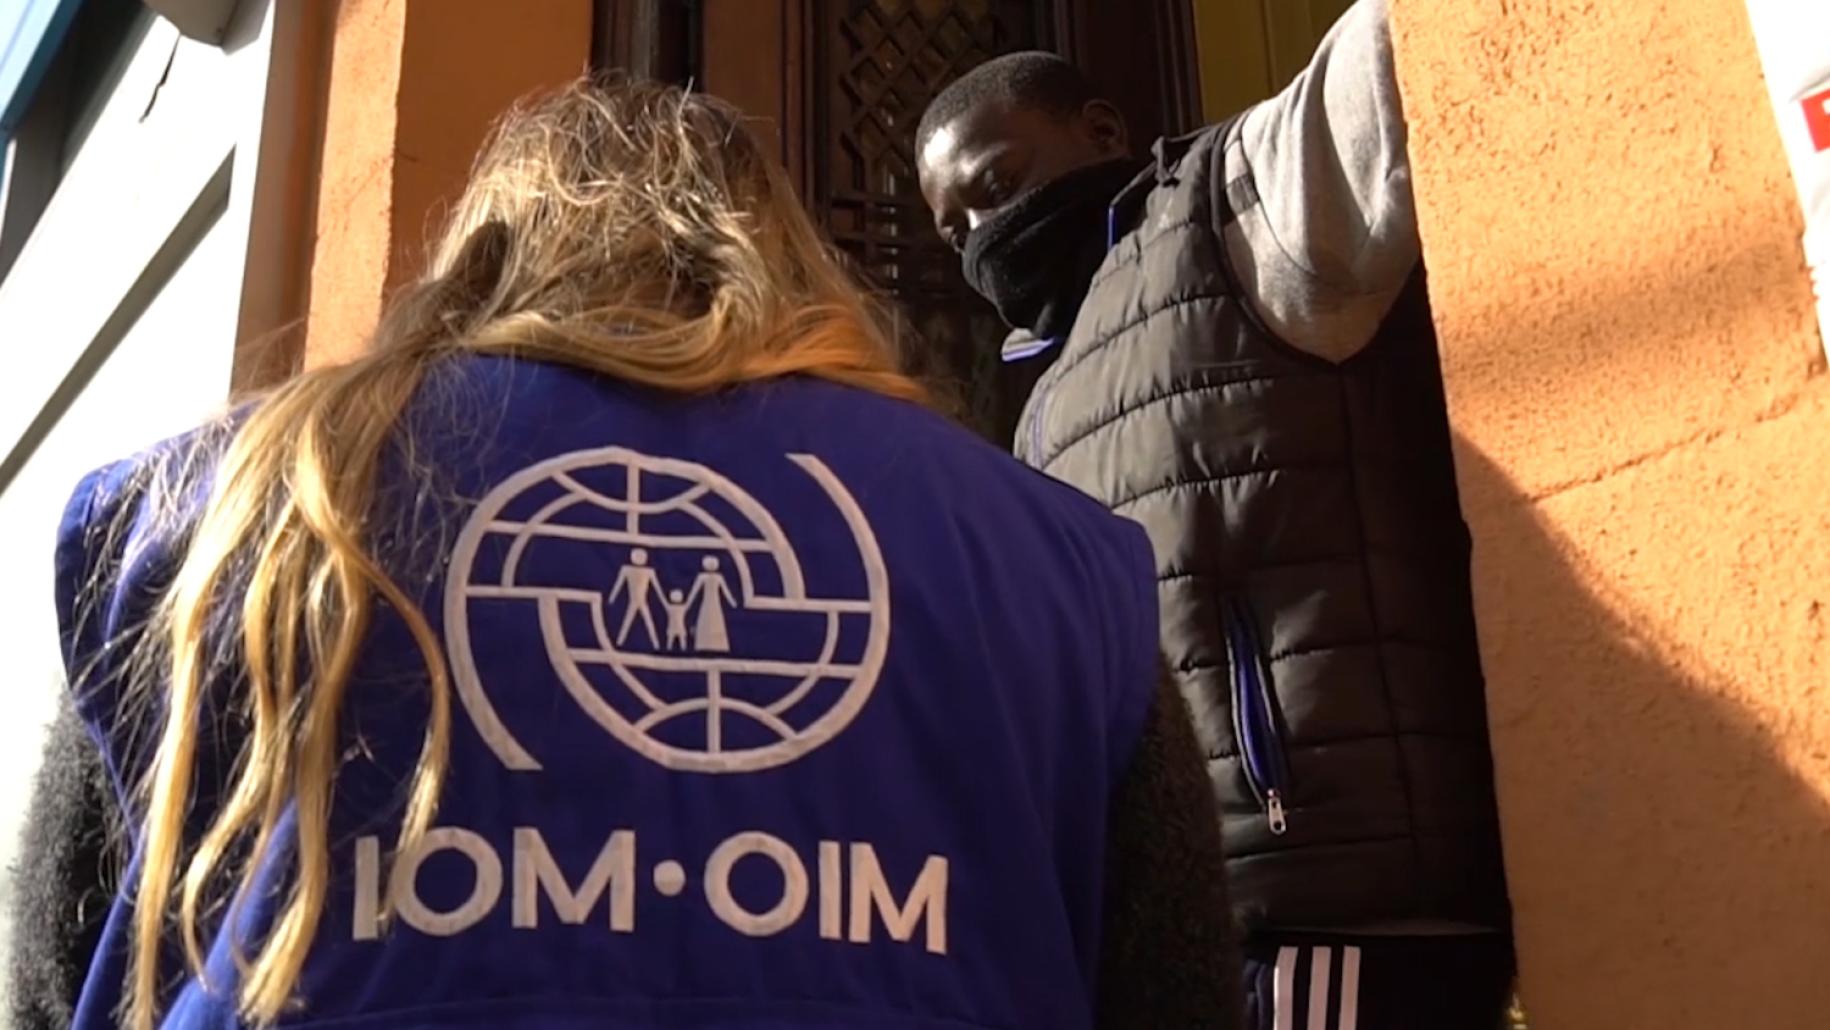 An IOM Staff speaks to a man at the entry to his home.